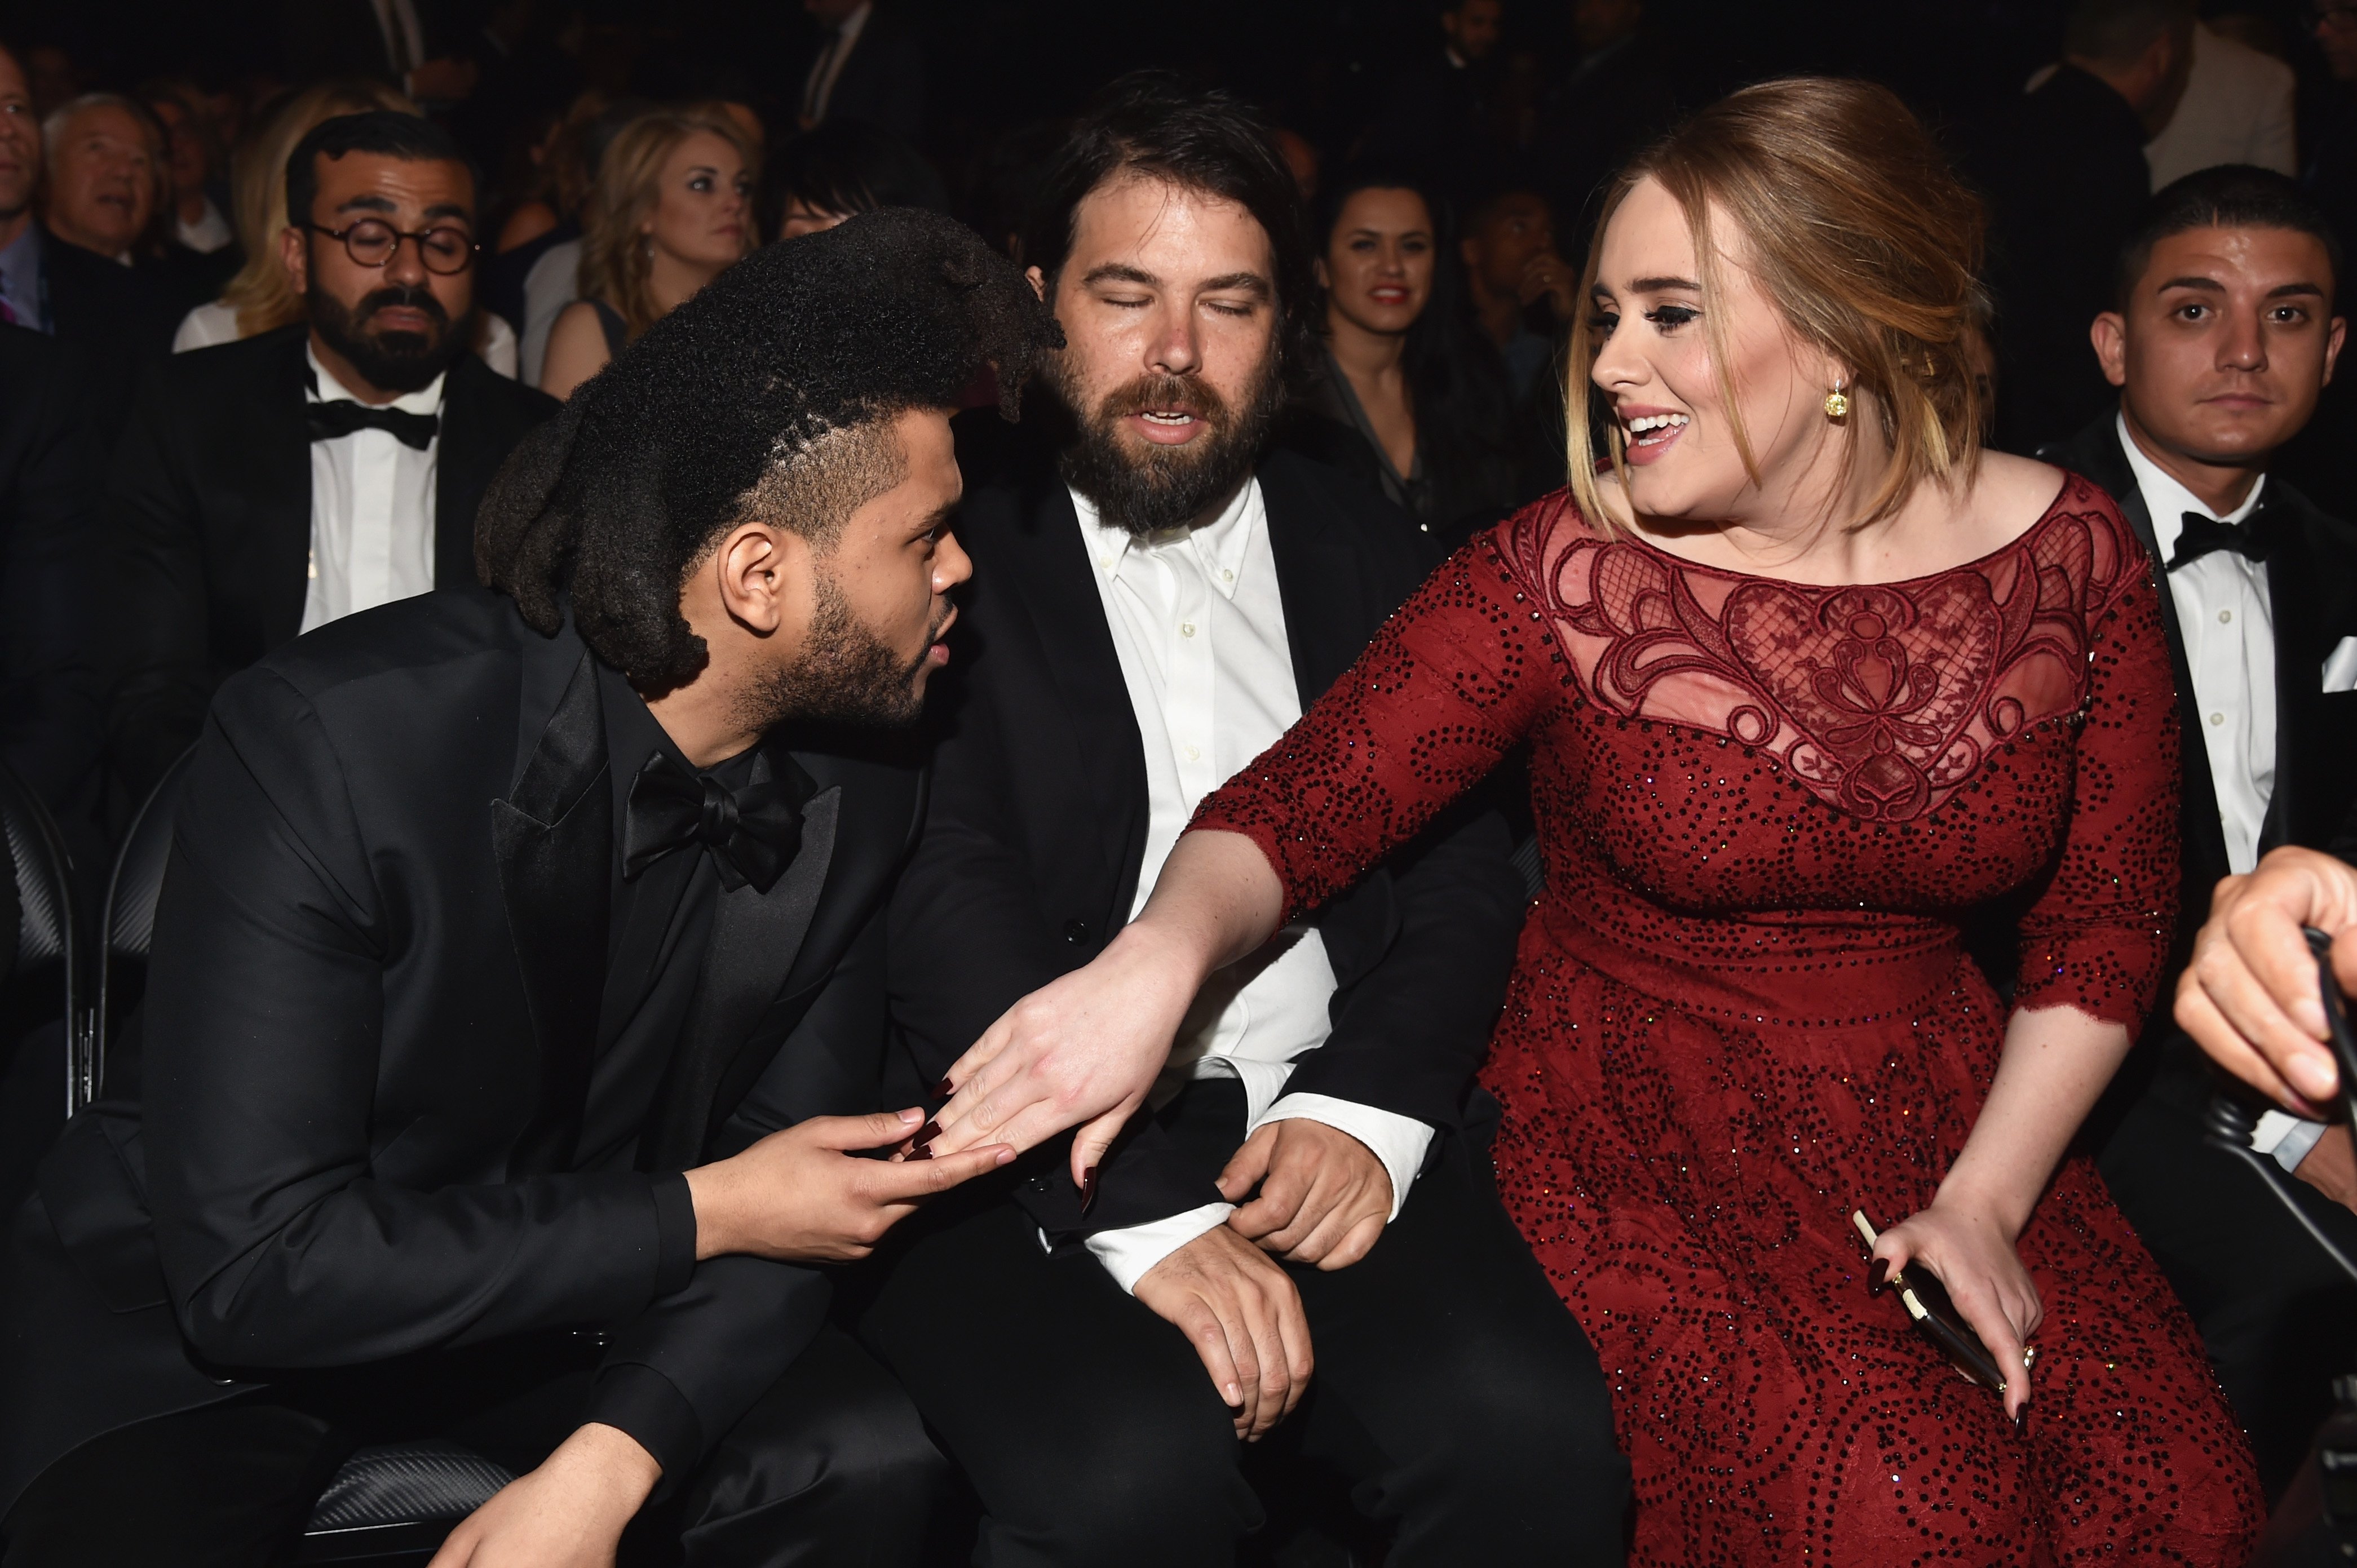 Singer The Weeknd, Simon Konecki and singer-songwriter Adele during The 58th GRAMMY Awards at Staples Center on February 15, 2016, in Los Angeles, California. | Source: Getty Images